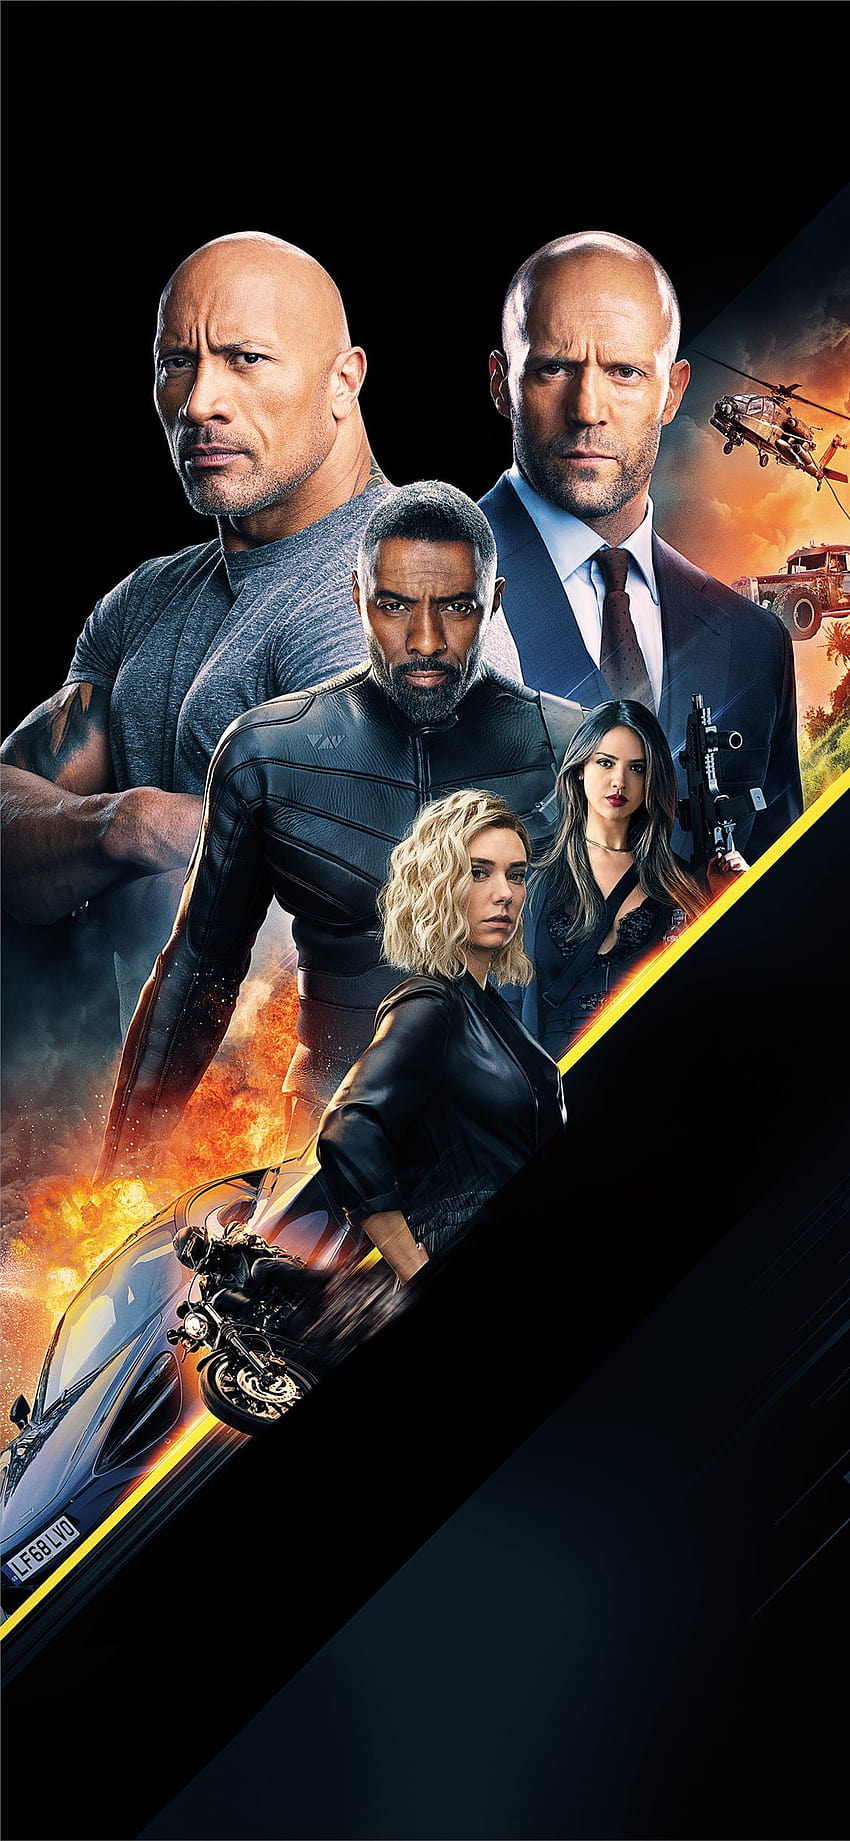 hobbs and shaw iPhone X, hobs HD phone wallpaper